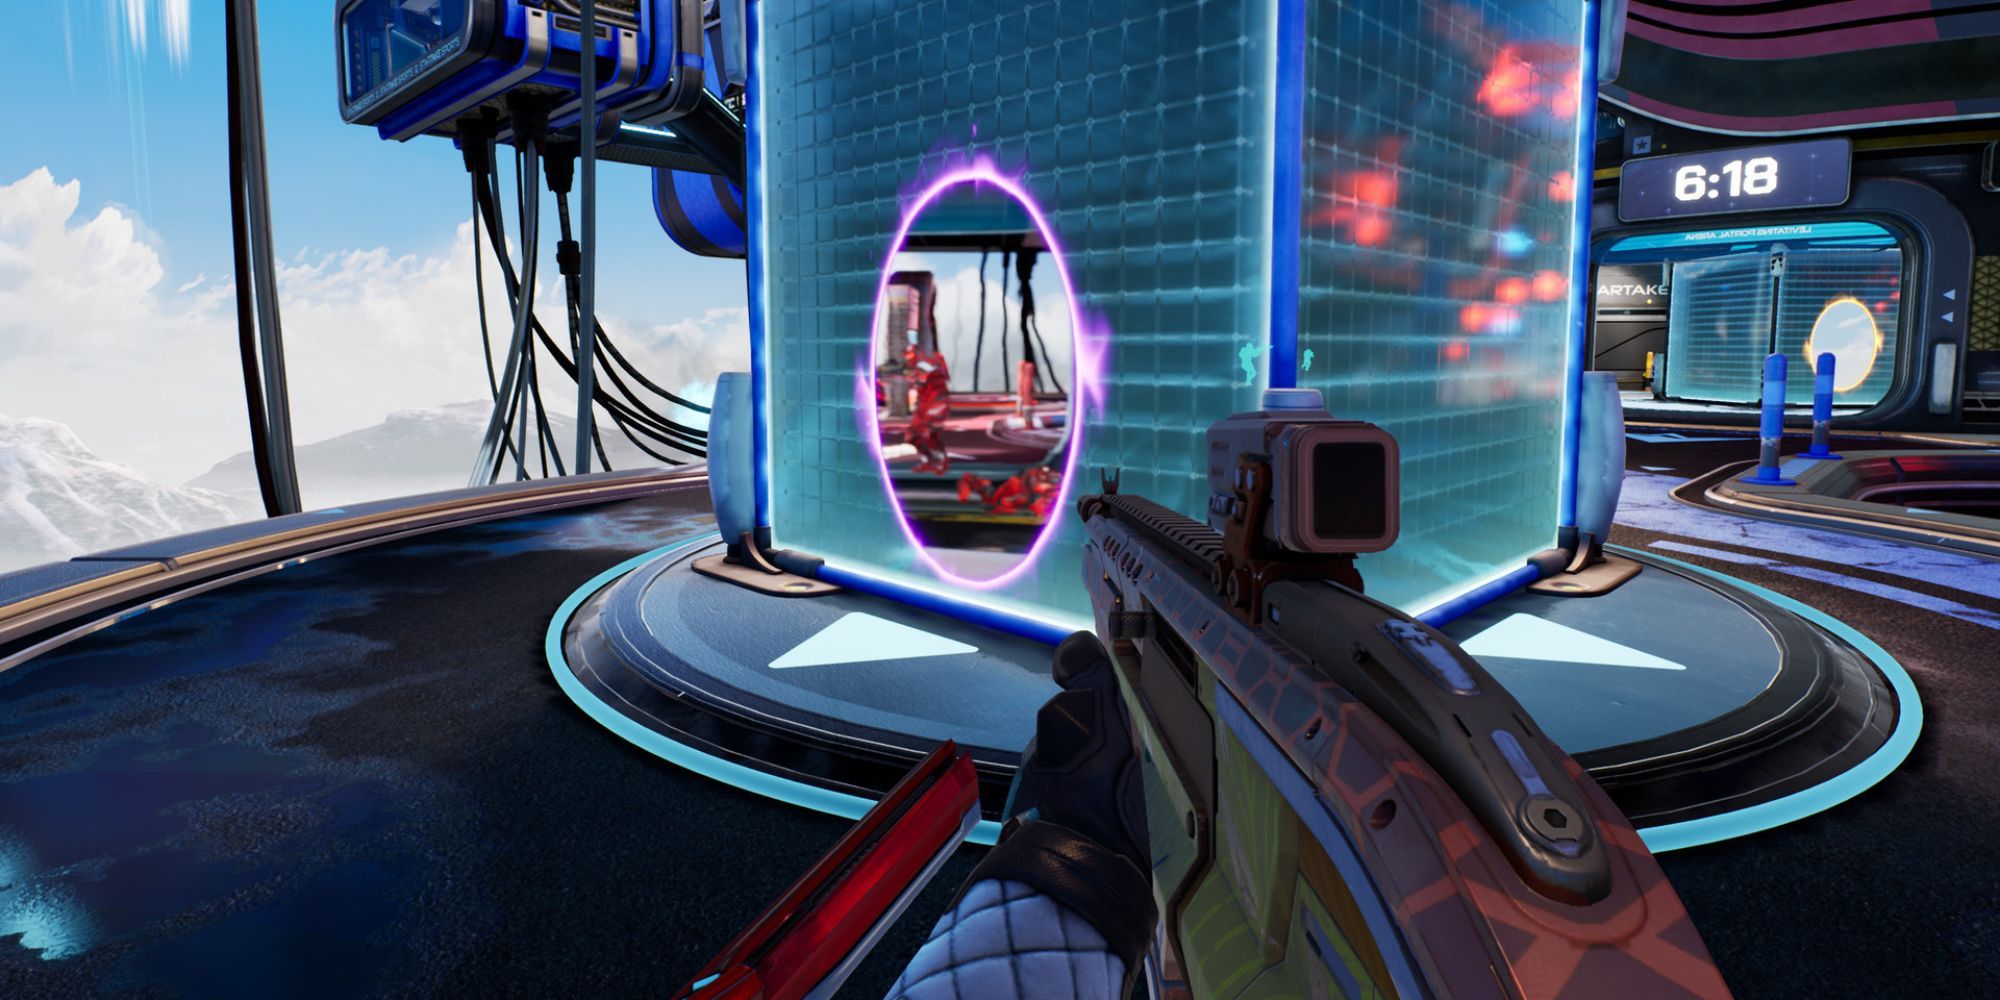 A player peeks into an enemy area using a portal